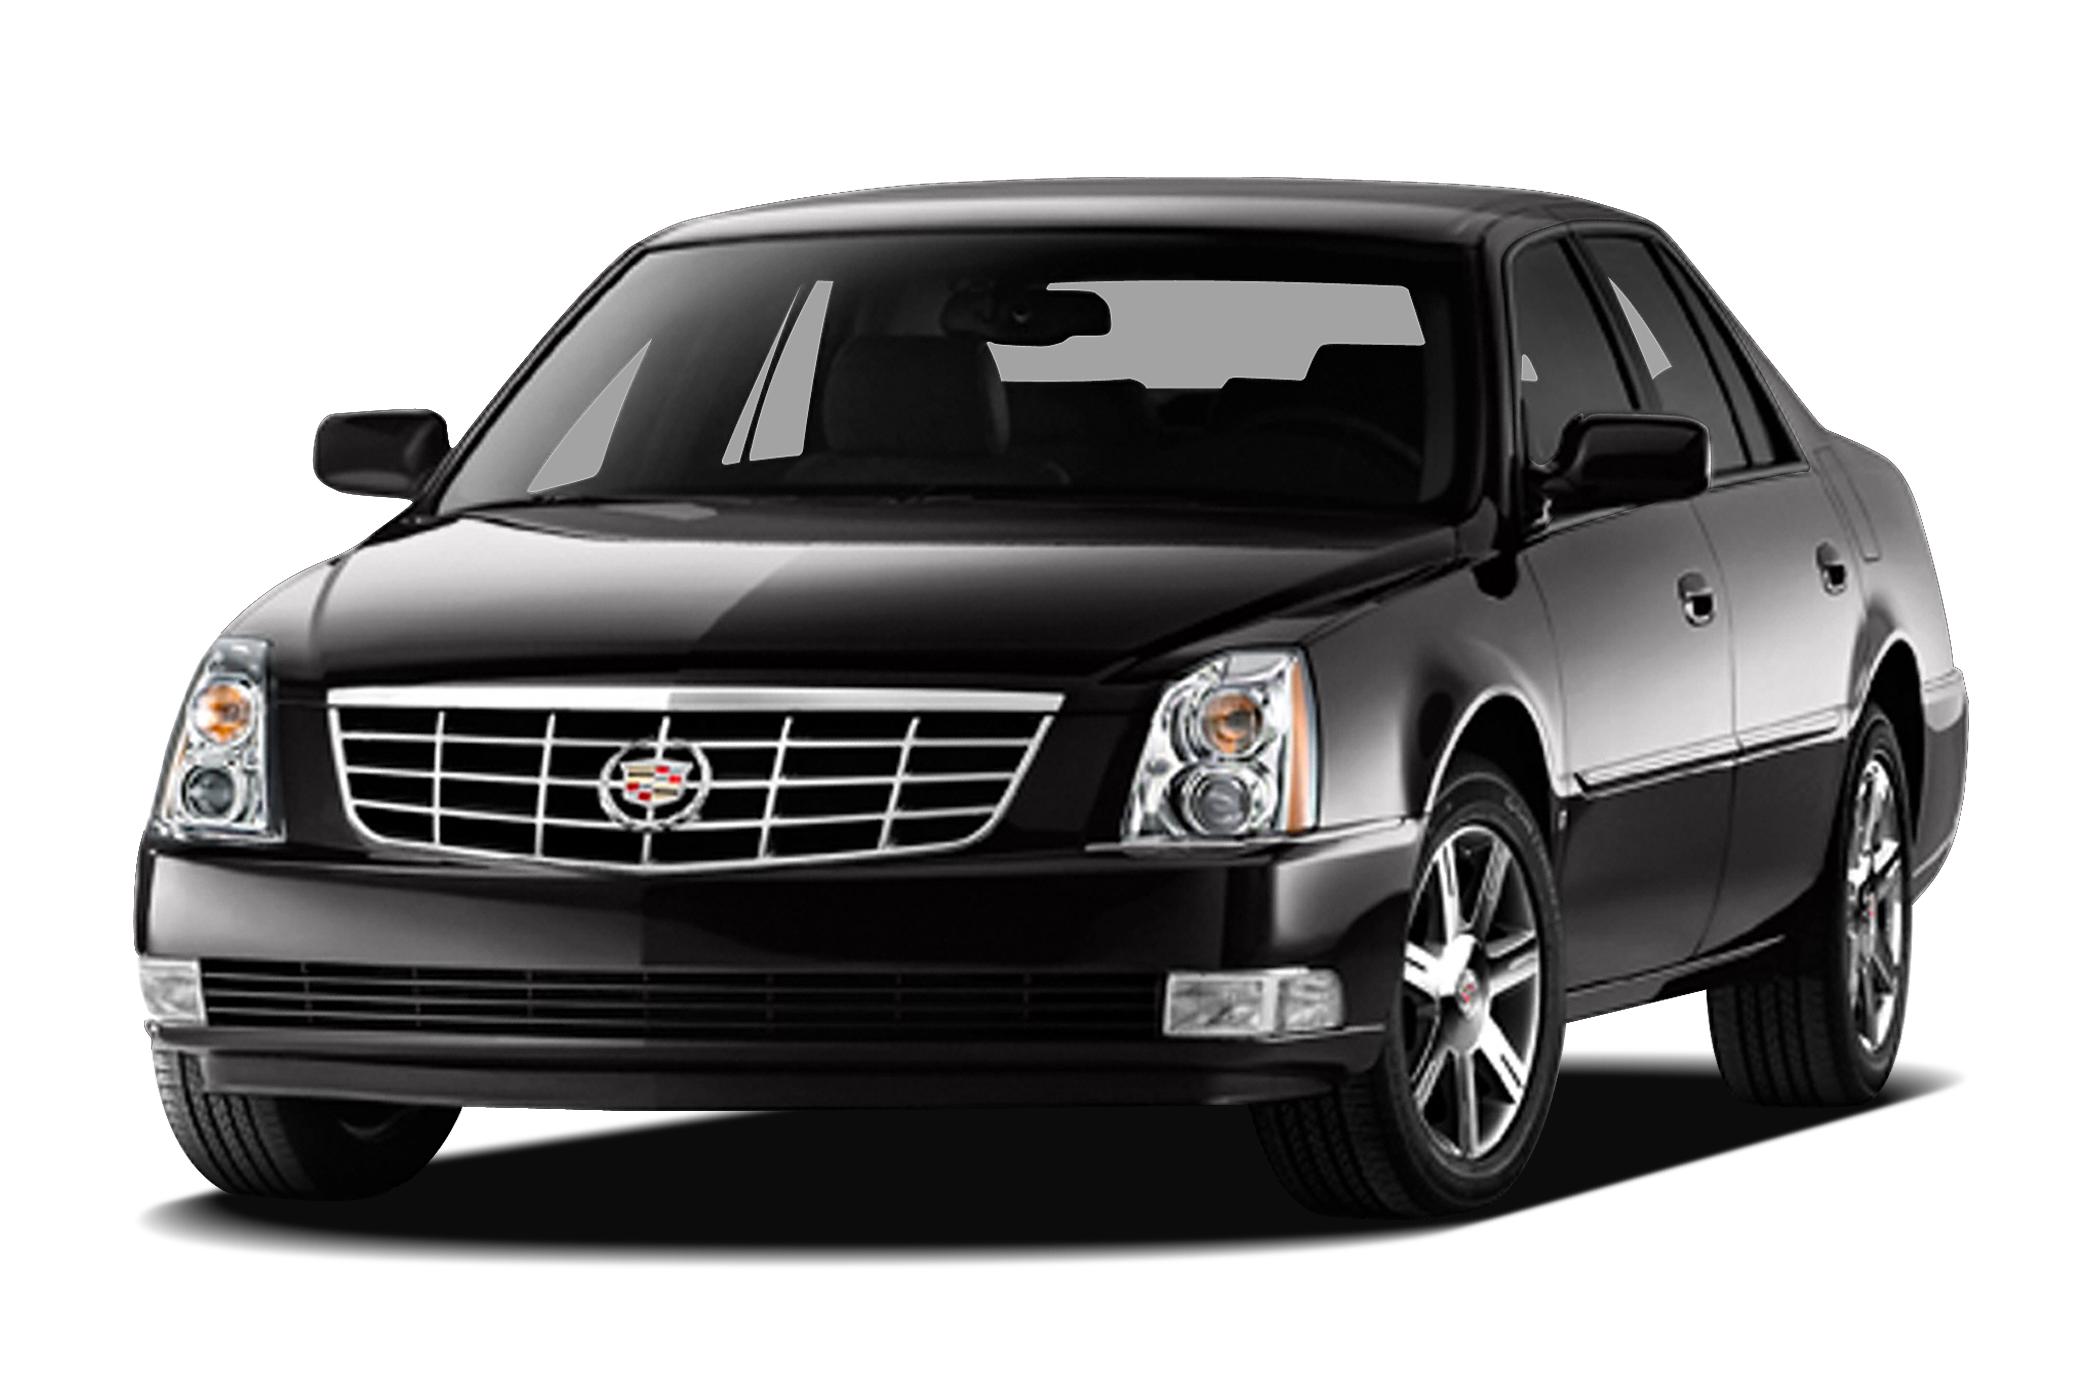 2010 Cadillac DTS - View Specs, Prices & Photos - WHEELS.ca